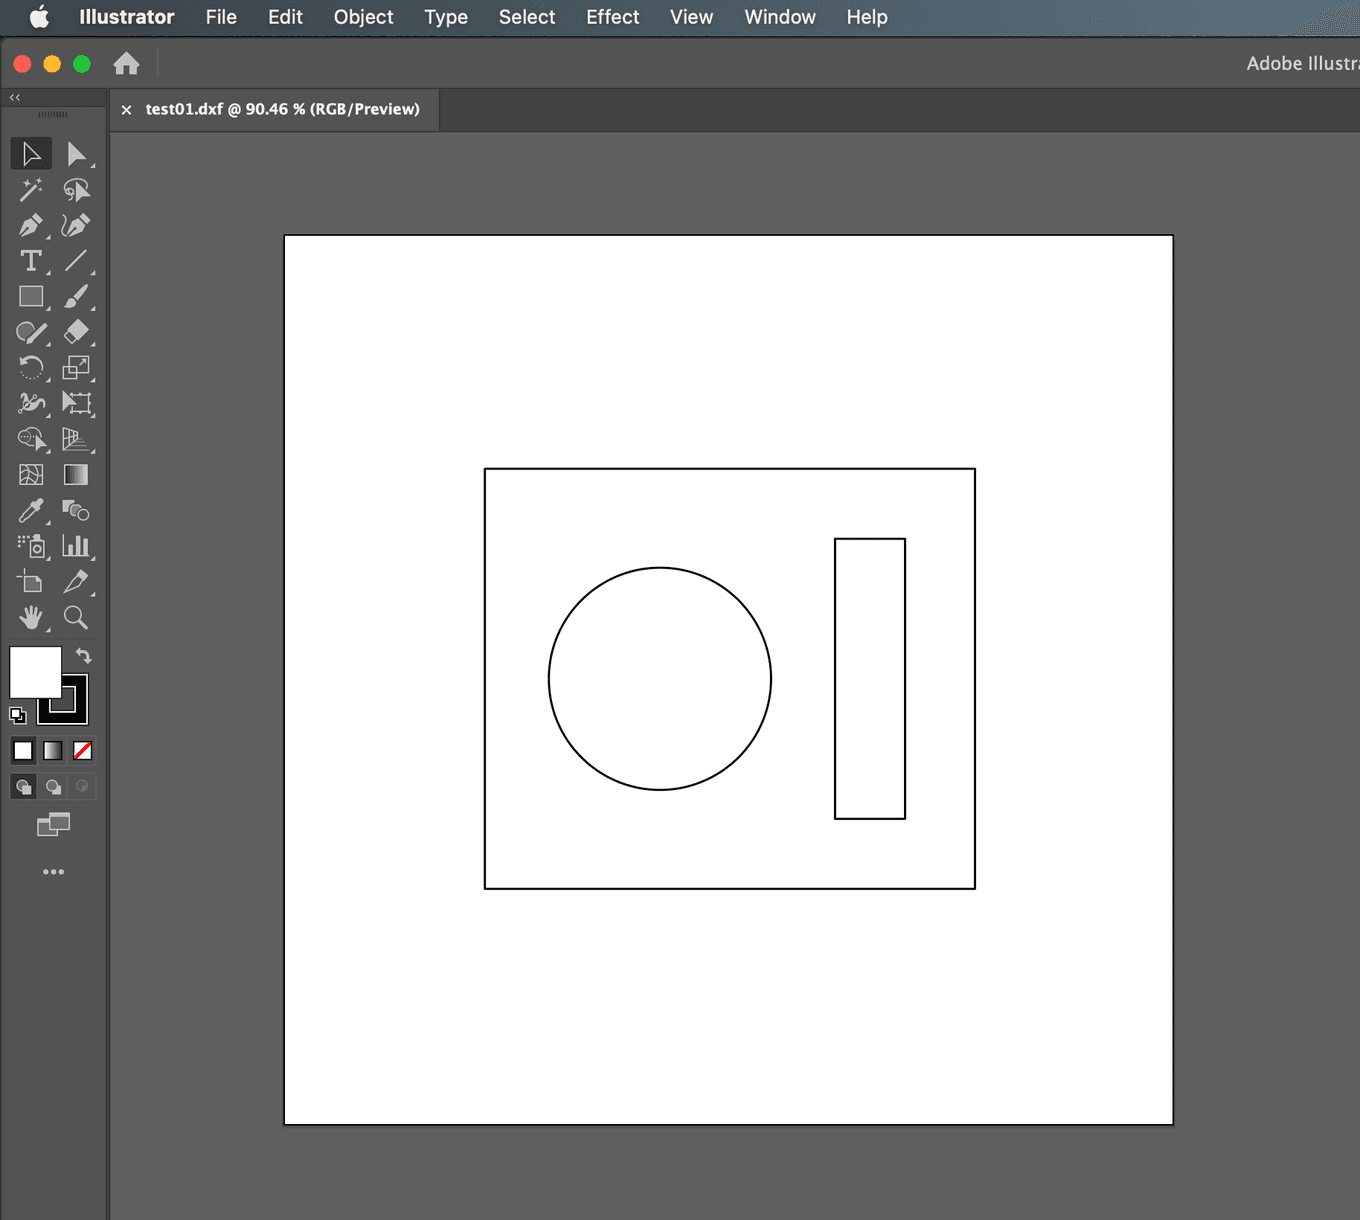 Illustrator: Rectangle with circle and smaller rectangle inside, on a white artboard